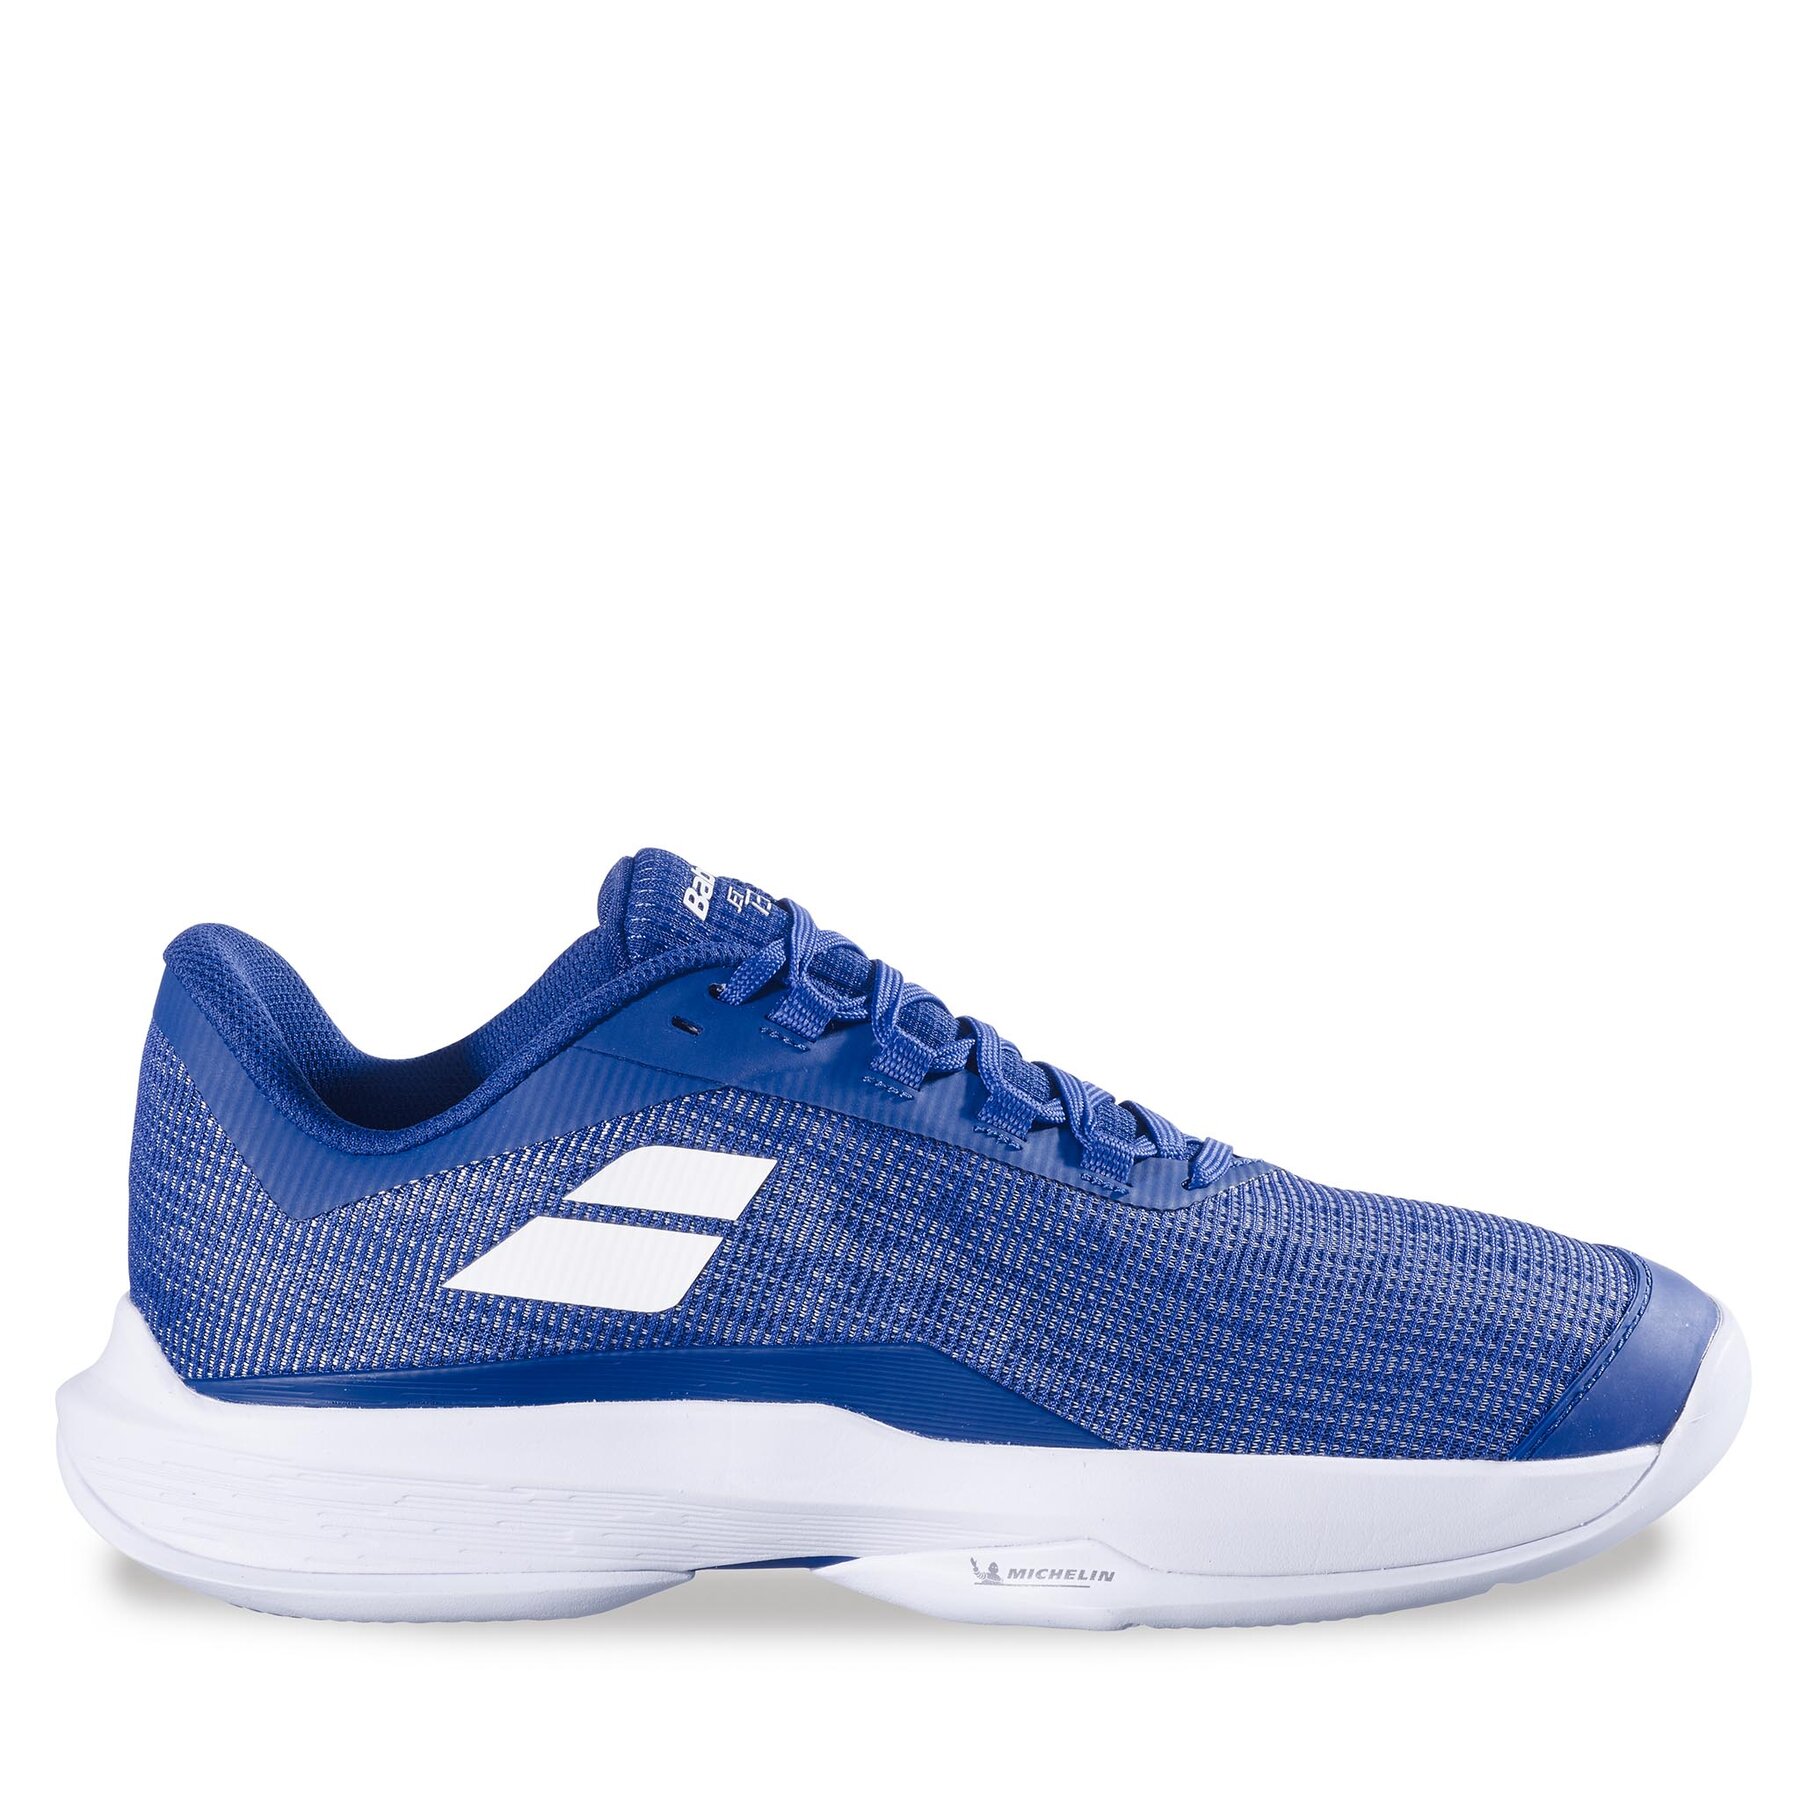 Schuhe Babolat Jet Tere 2 Clay 30S24650 Mombeo Blue von Babolat